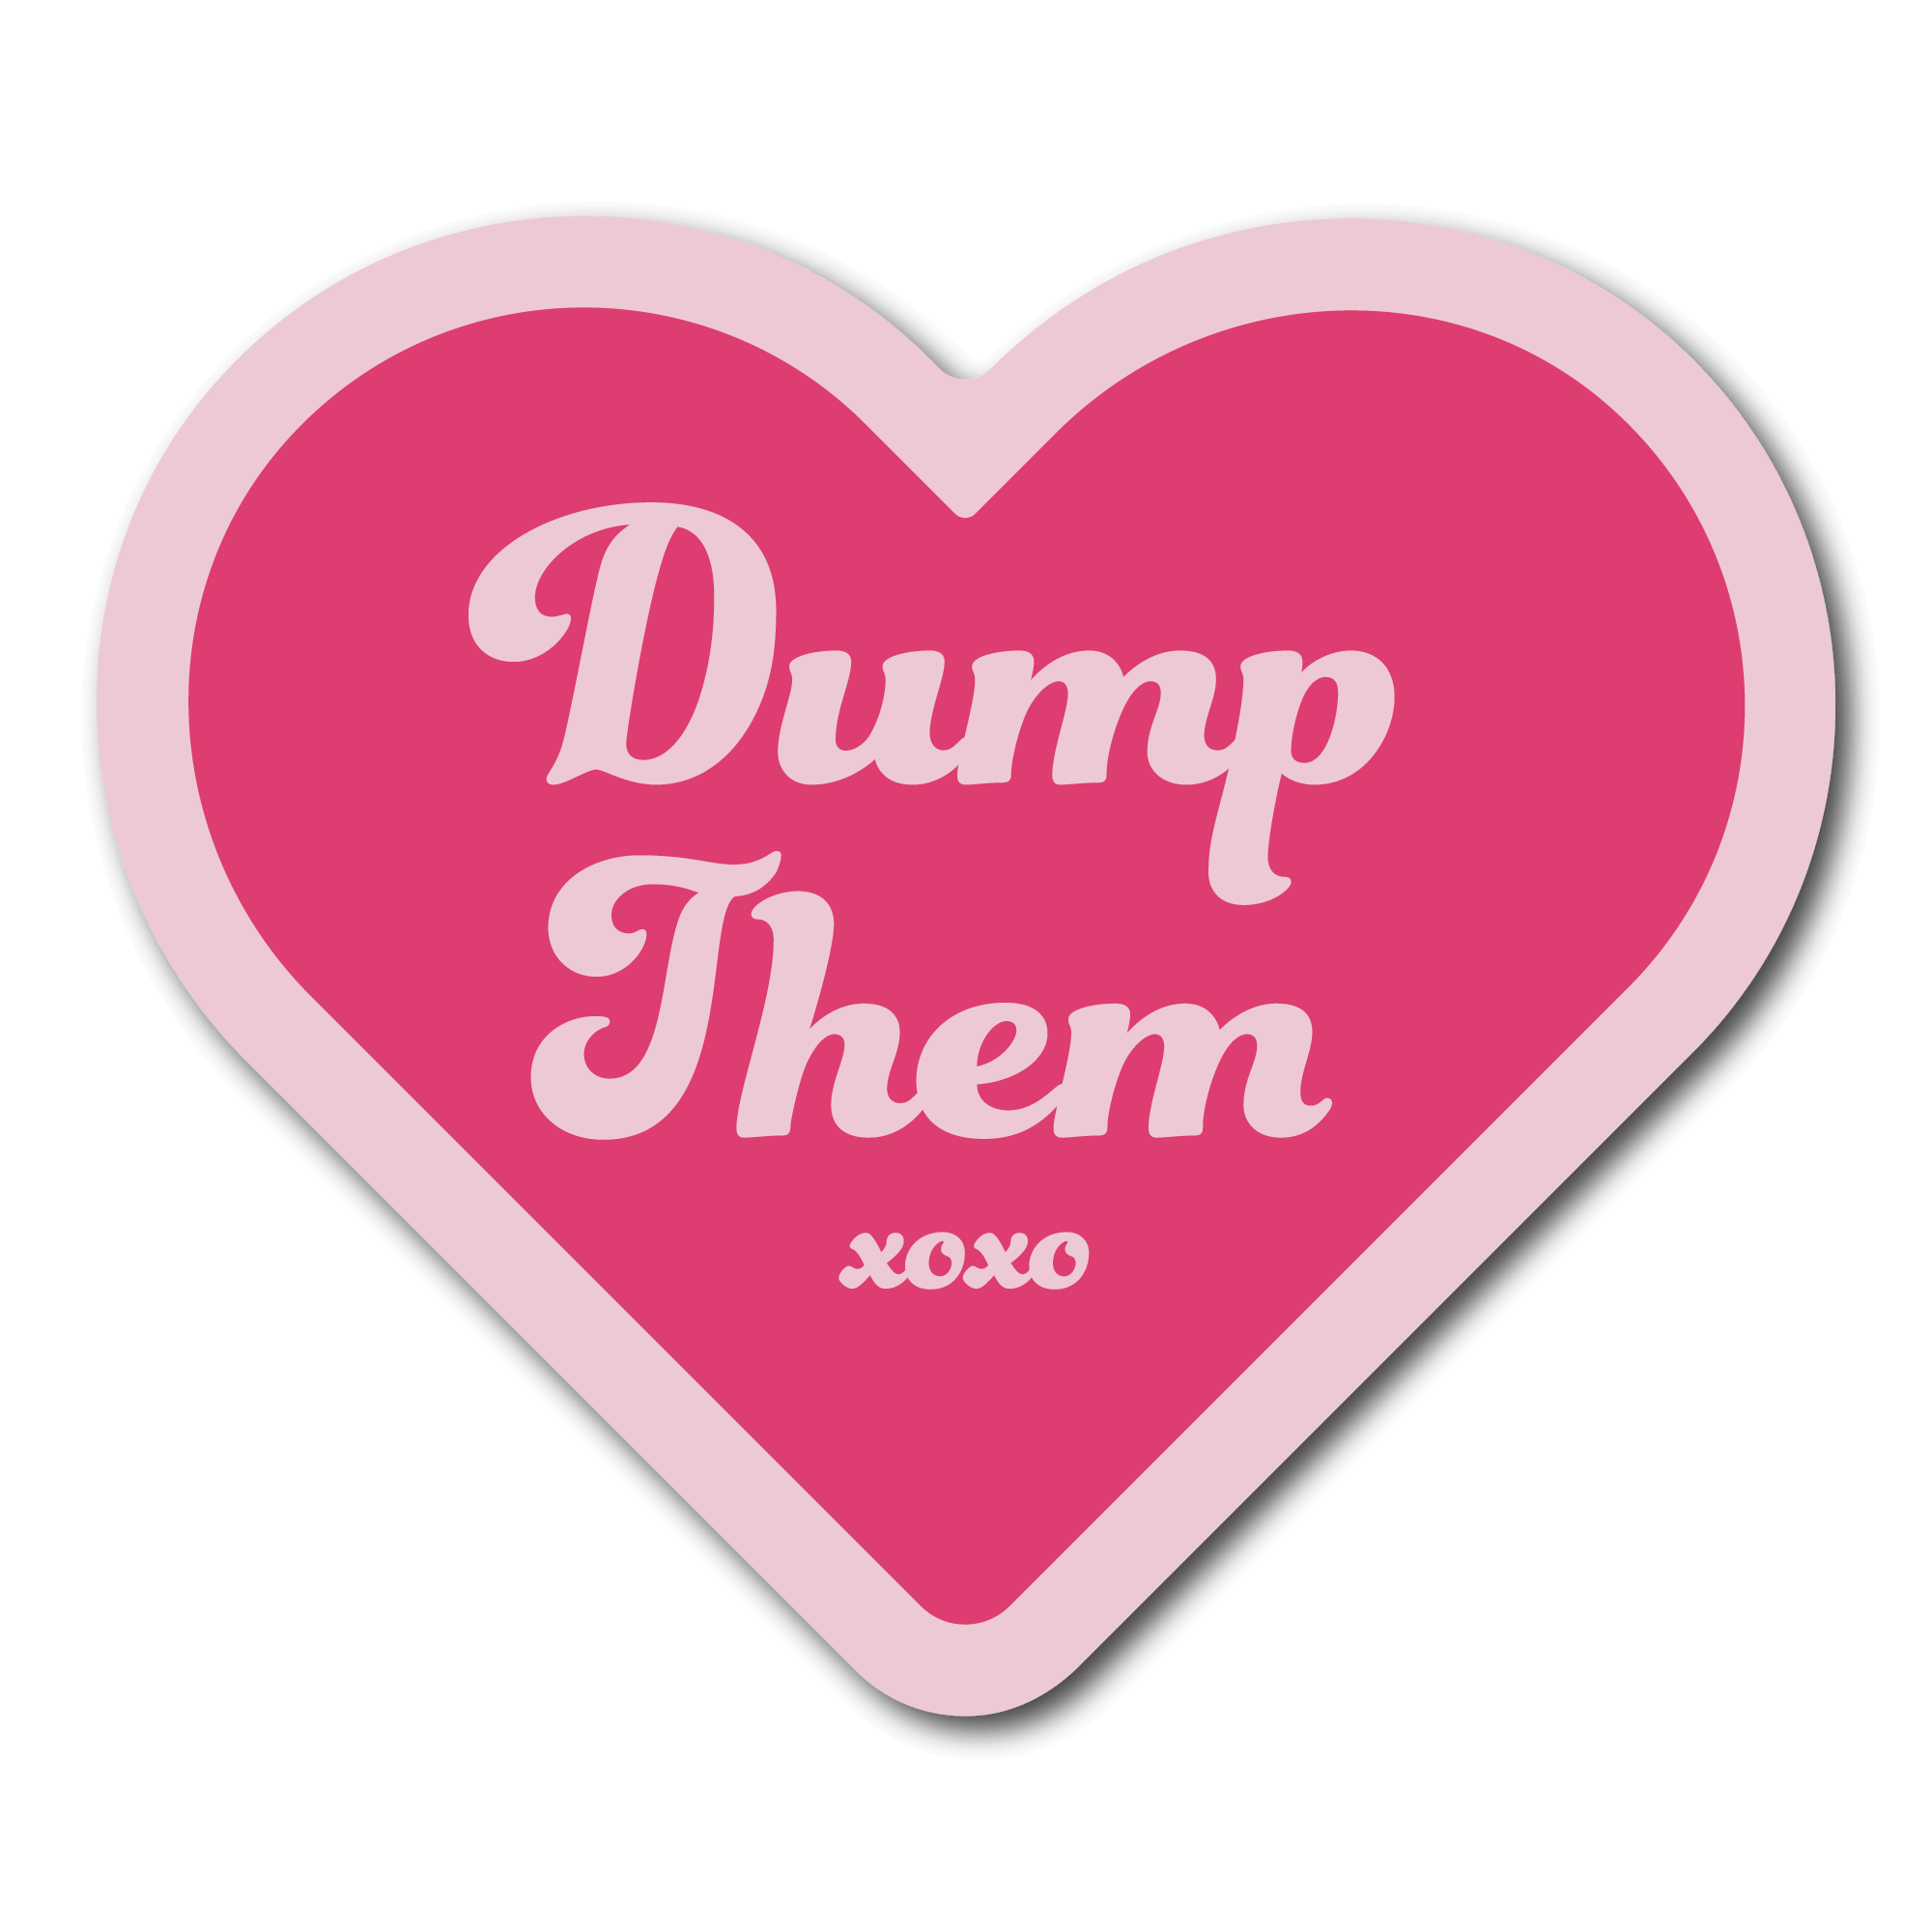 Small Pink Heart Sticker that says Dump Them with xoxo under